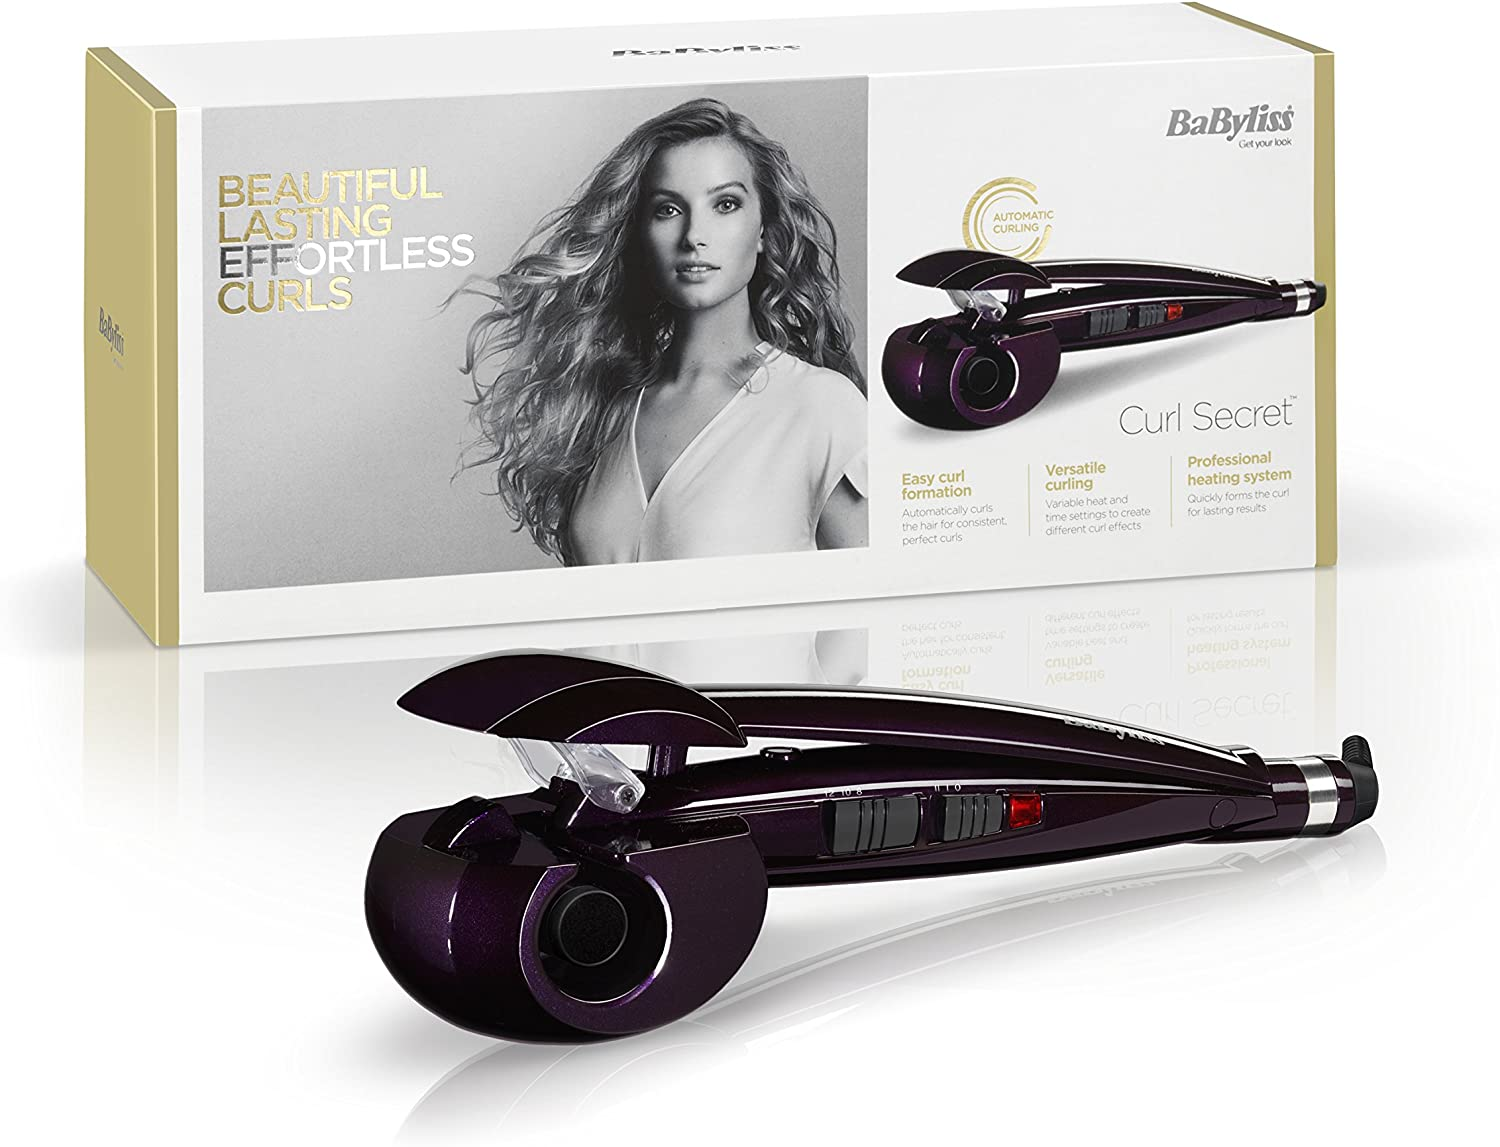 Features and Specifications: Babyliss Curl Secret